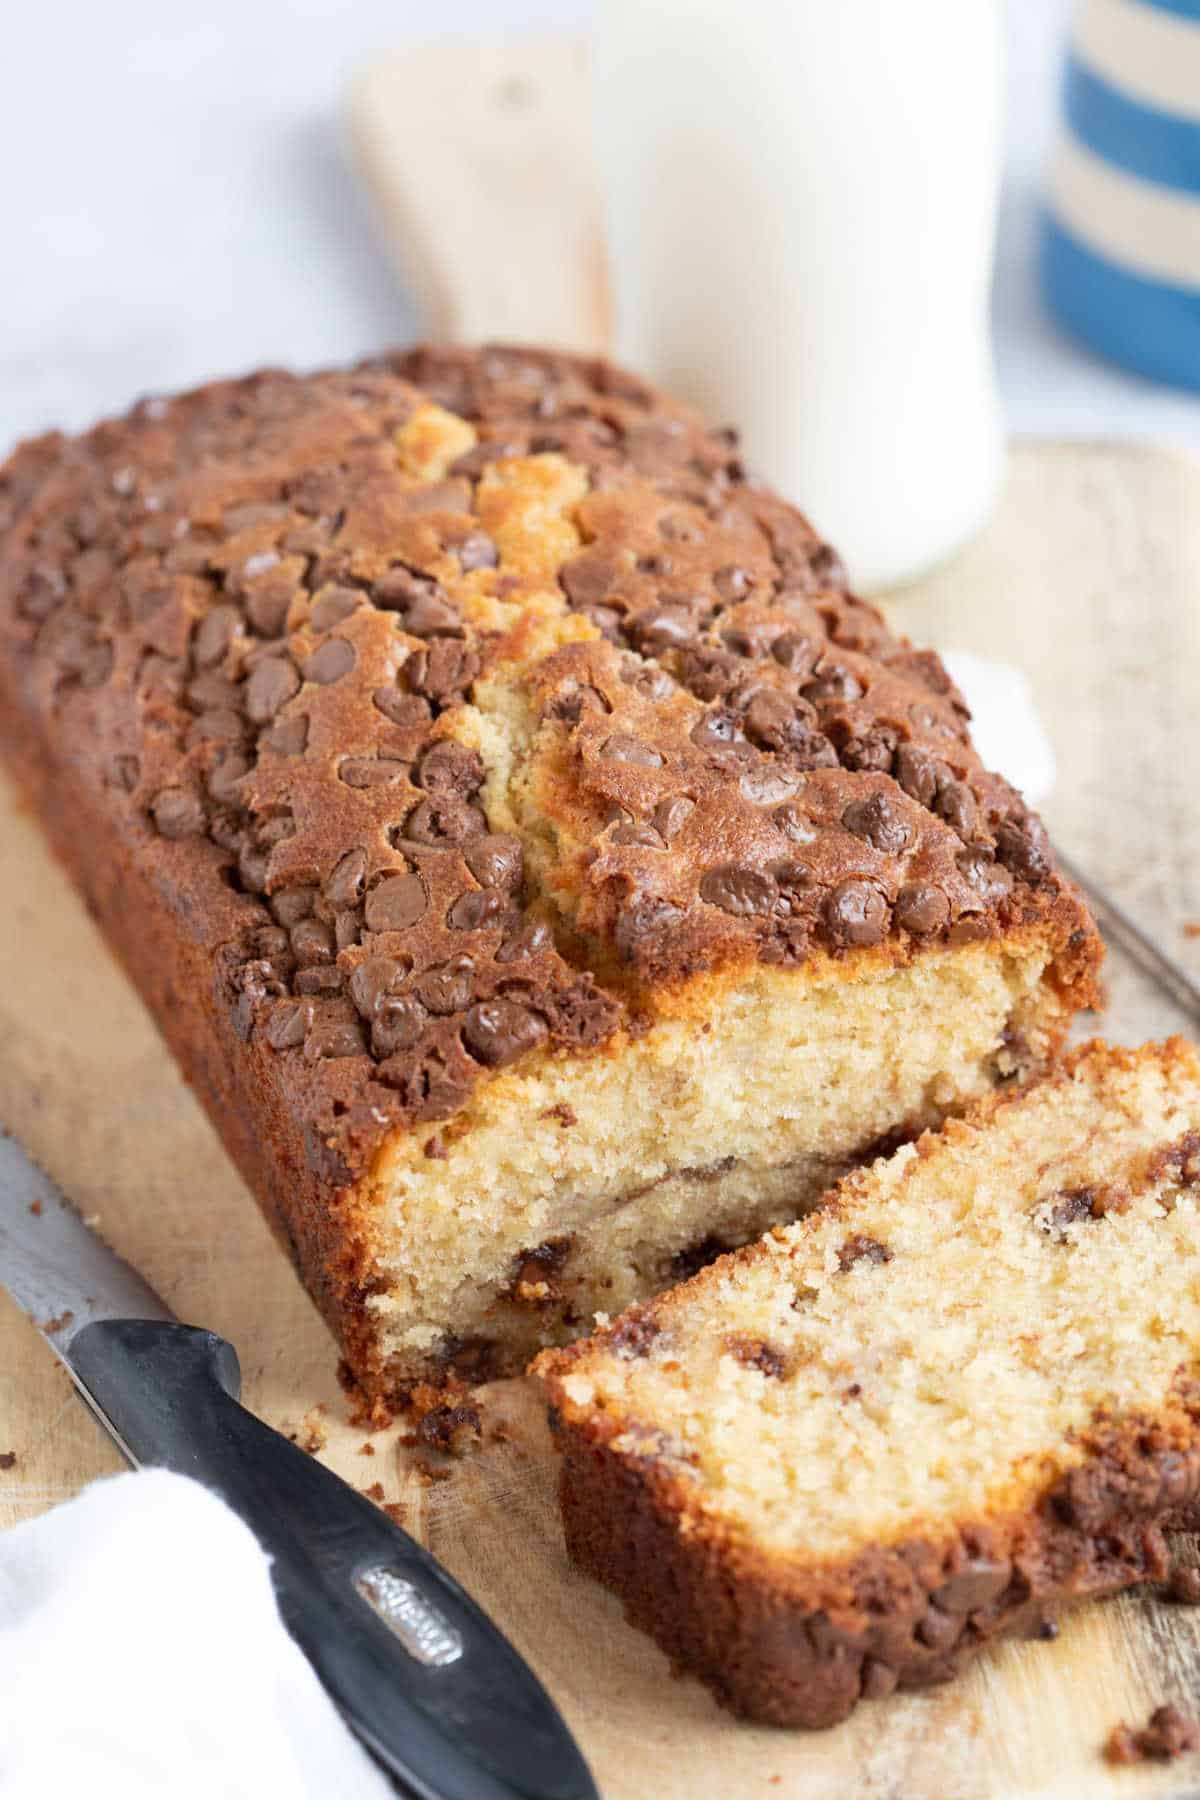 Banana bread with a slice cut off.